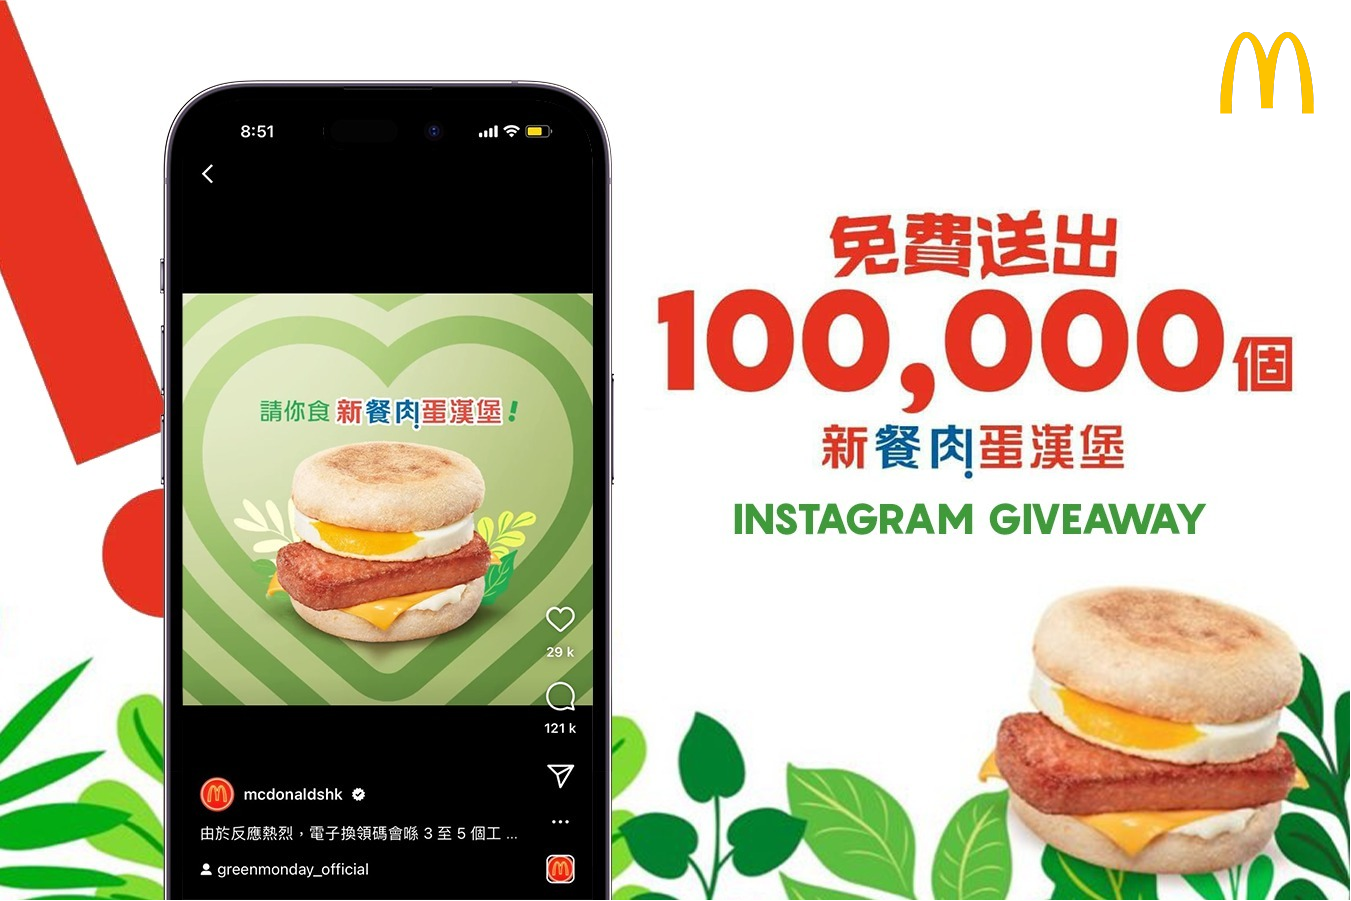 100,000 NEW LUNCHEON Meat McMuffin with Egg Instagram Giveaway